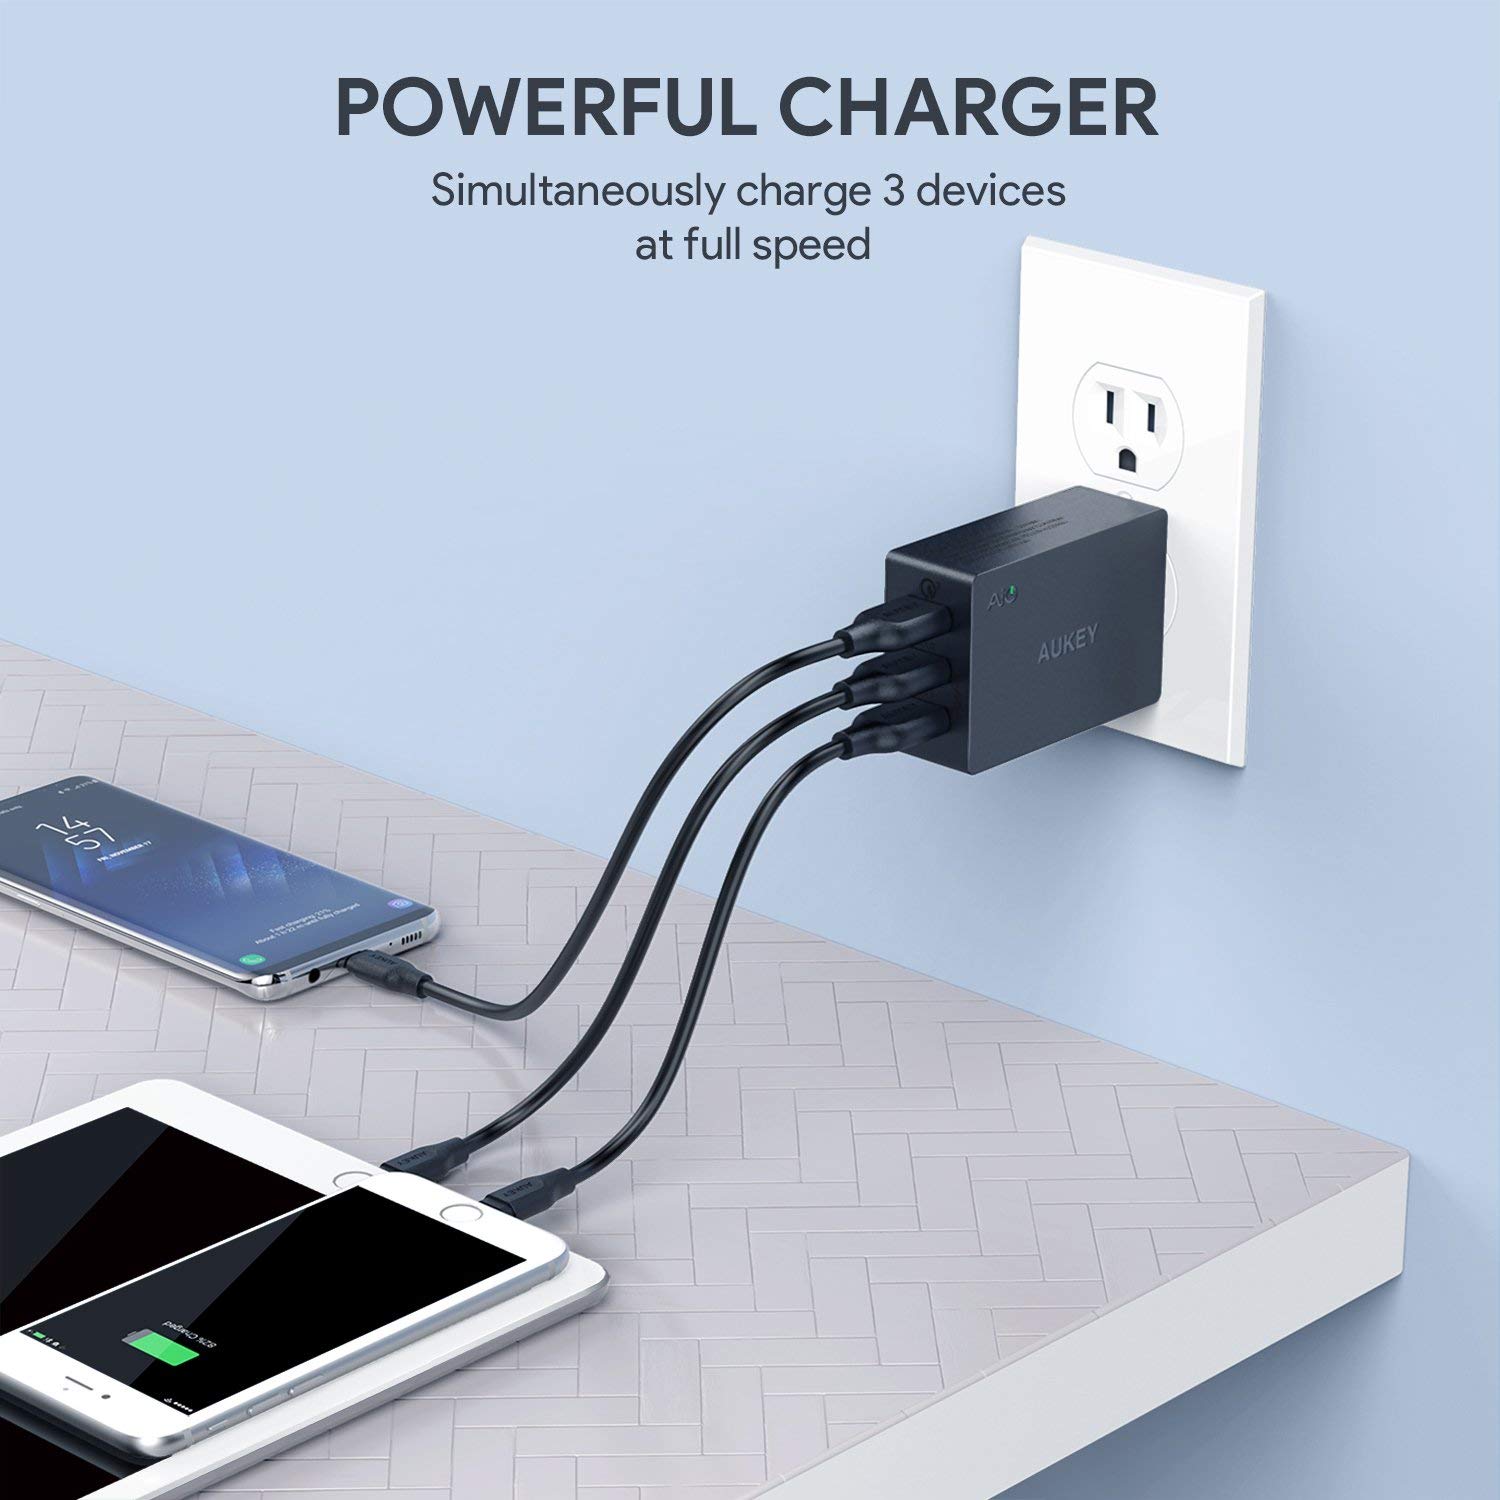 POWERFUL CHARGER Simultaneously charge 3 devices at full speed